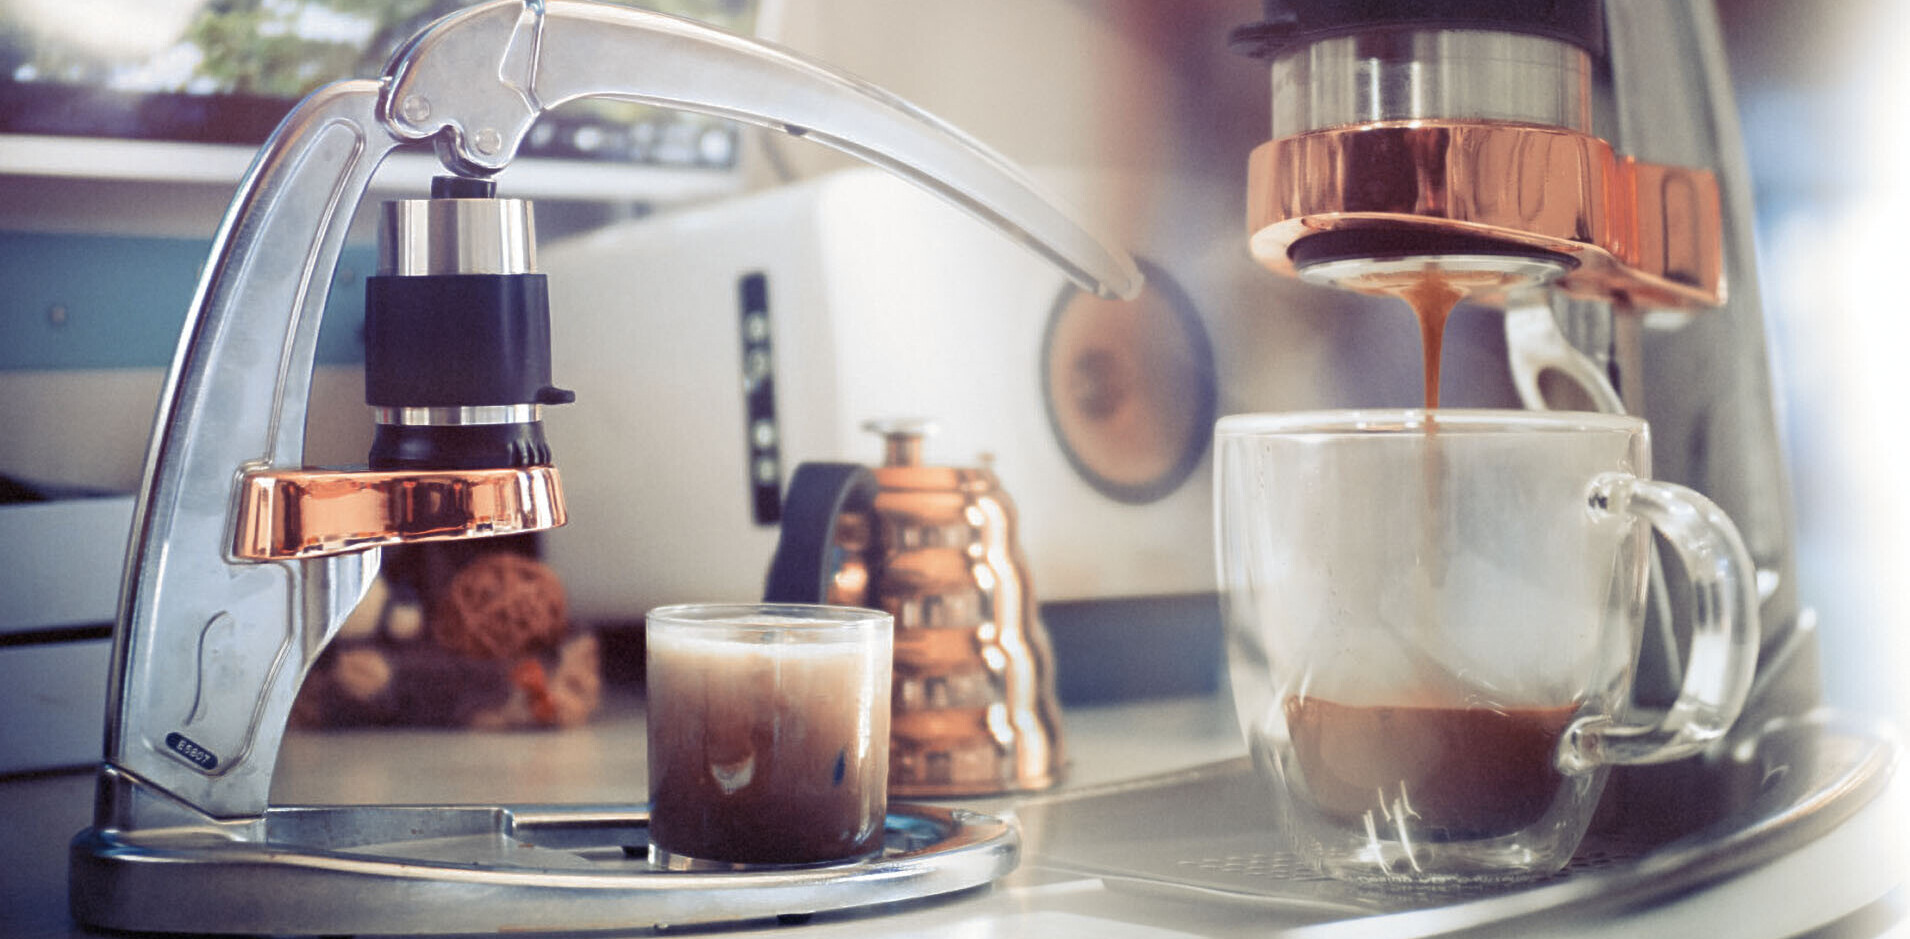 How to make espresso at home without breaking the bank